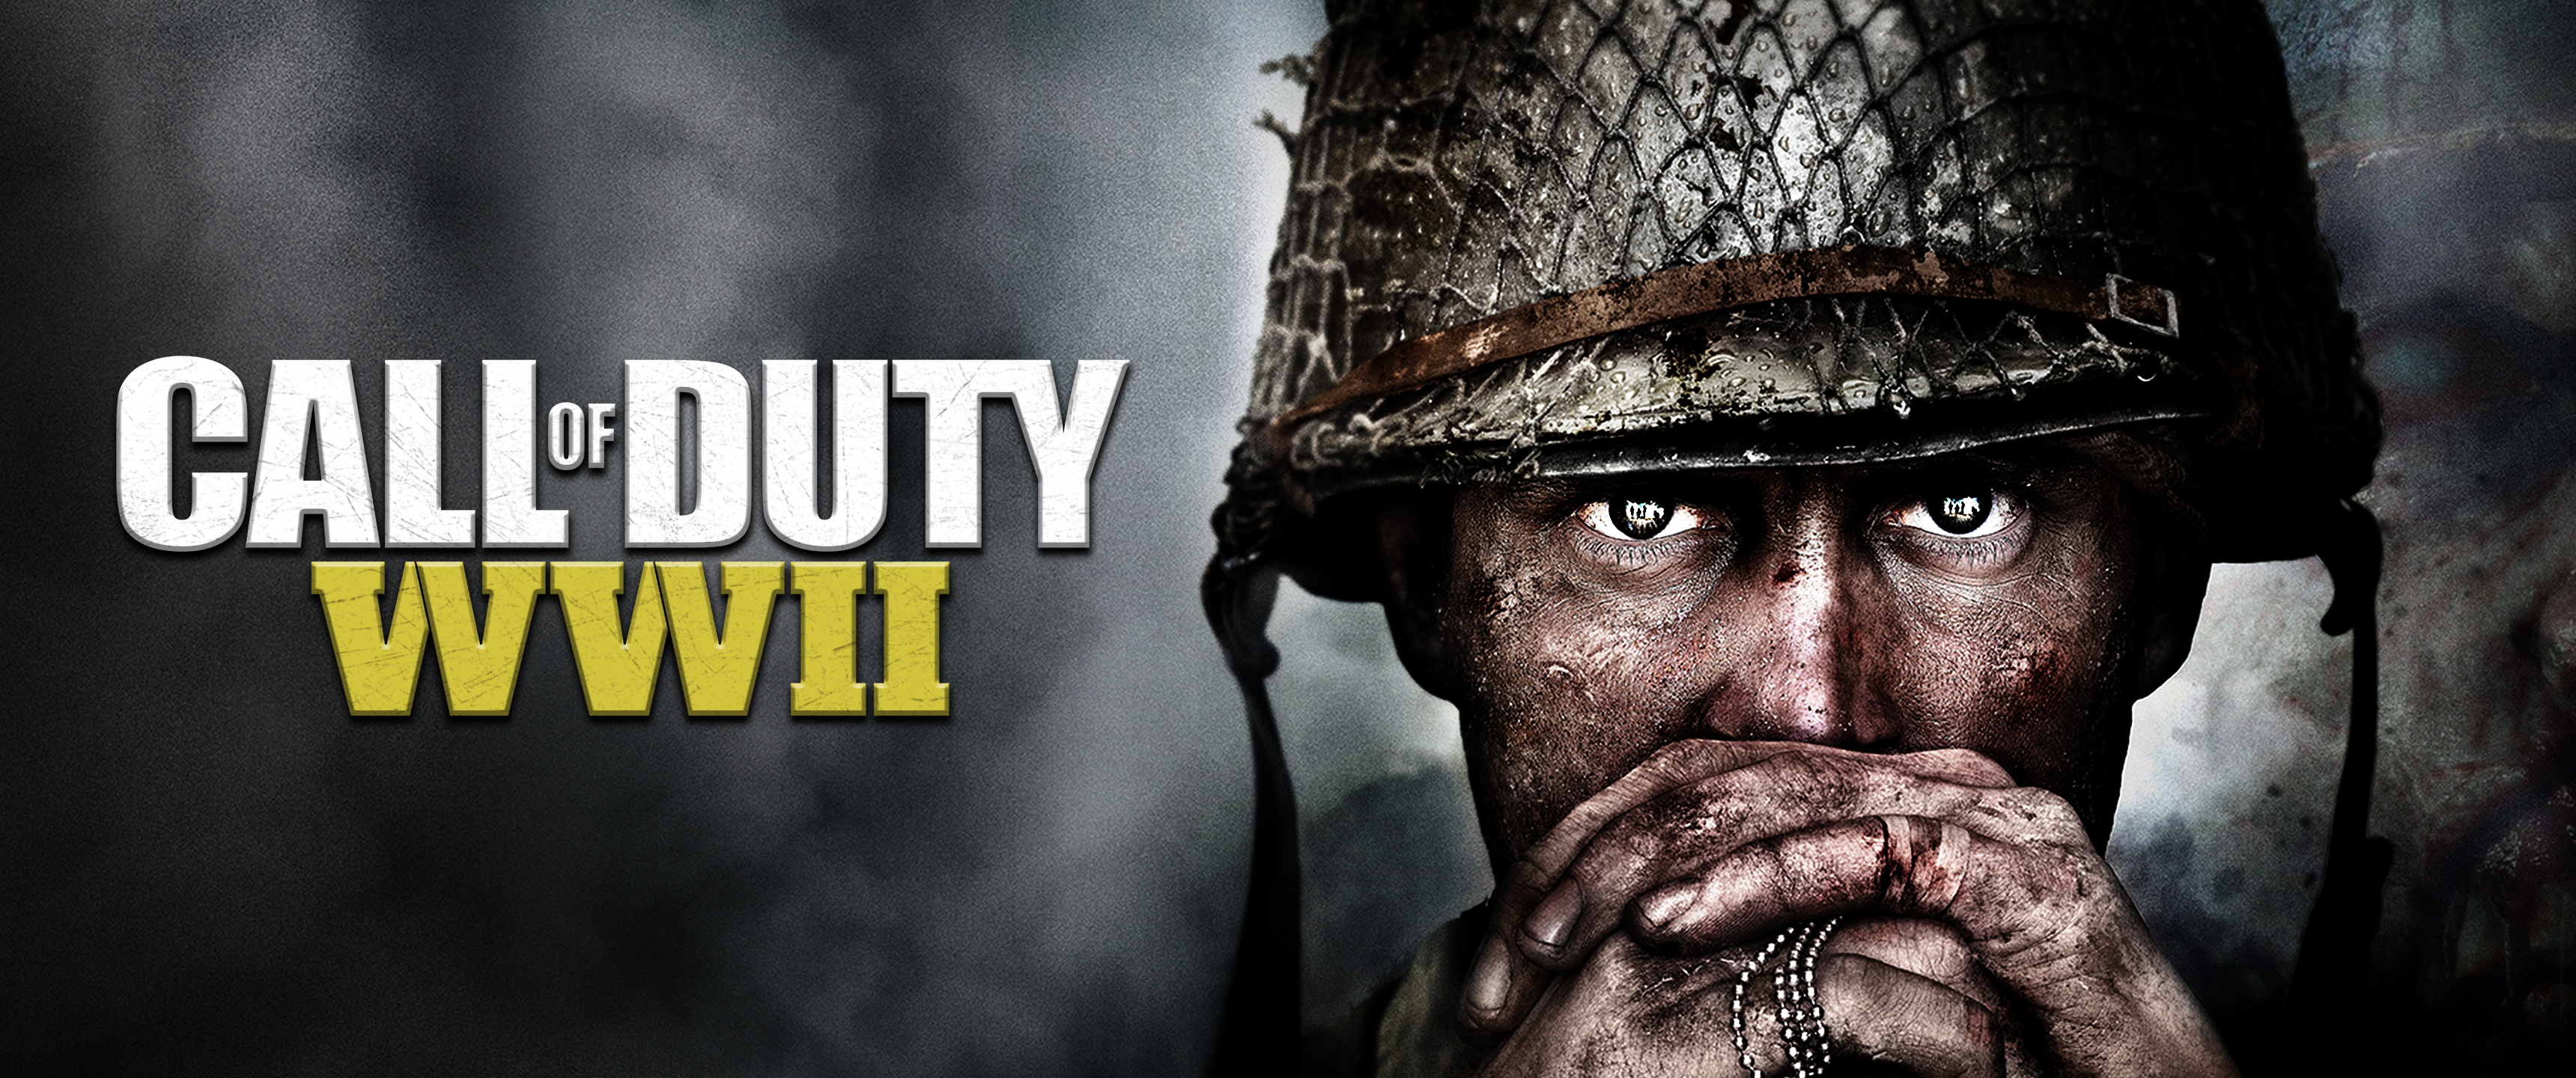 Call Of Duty Wwii Wallpapers Hd Resolution On Hd Wallpaper - Call Of Duty Wallpaper Ww2 - HD Wallpaper 